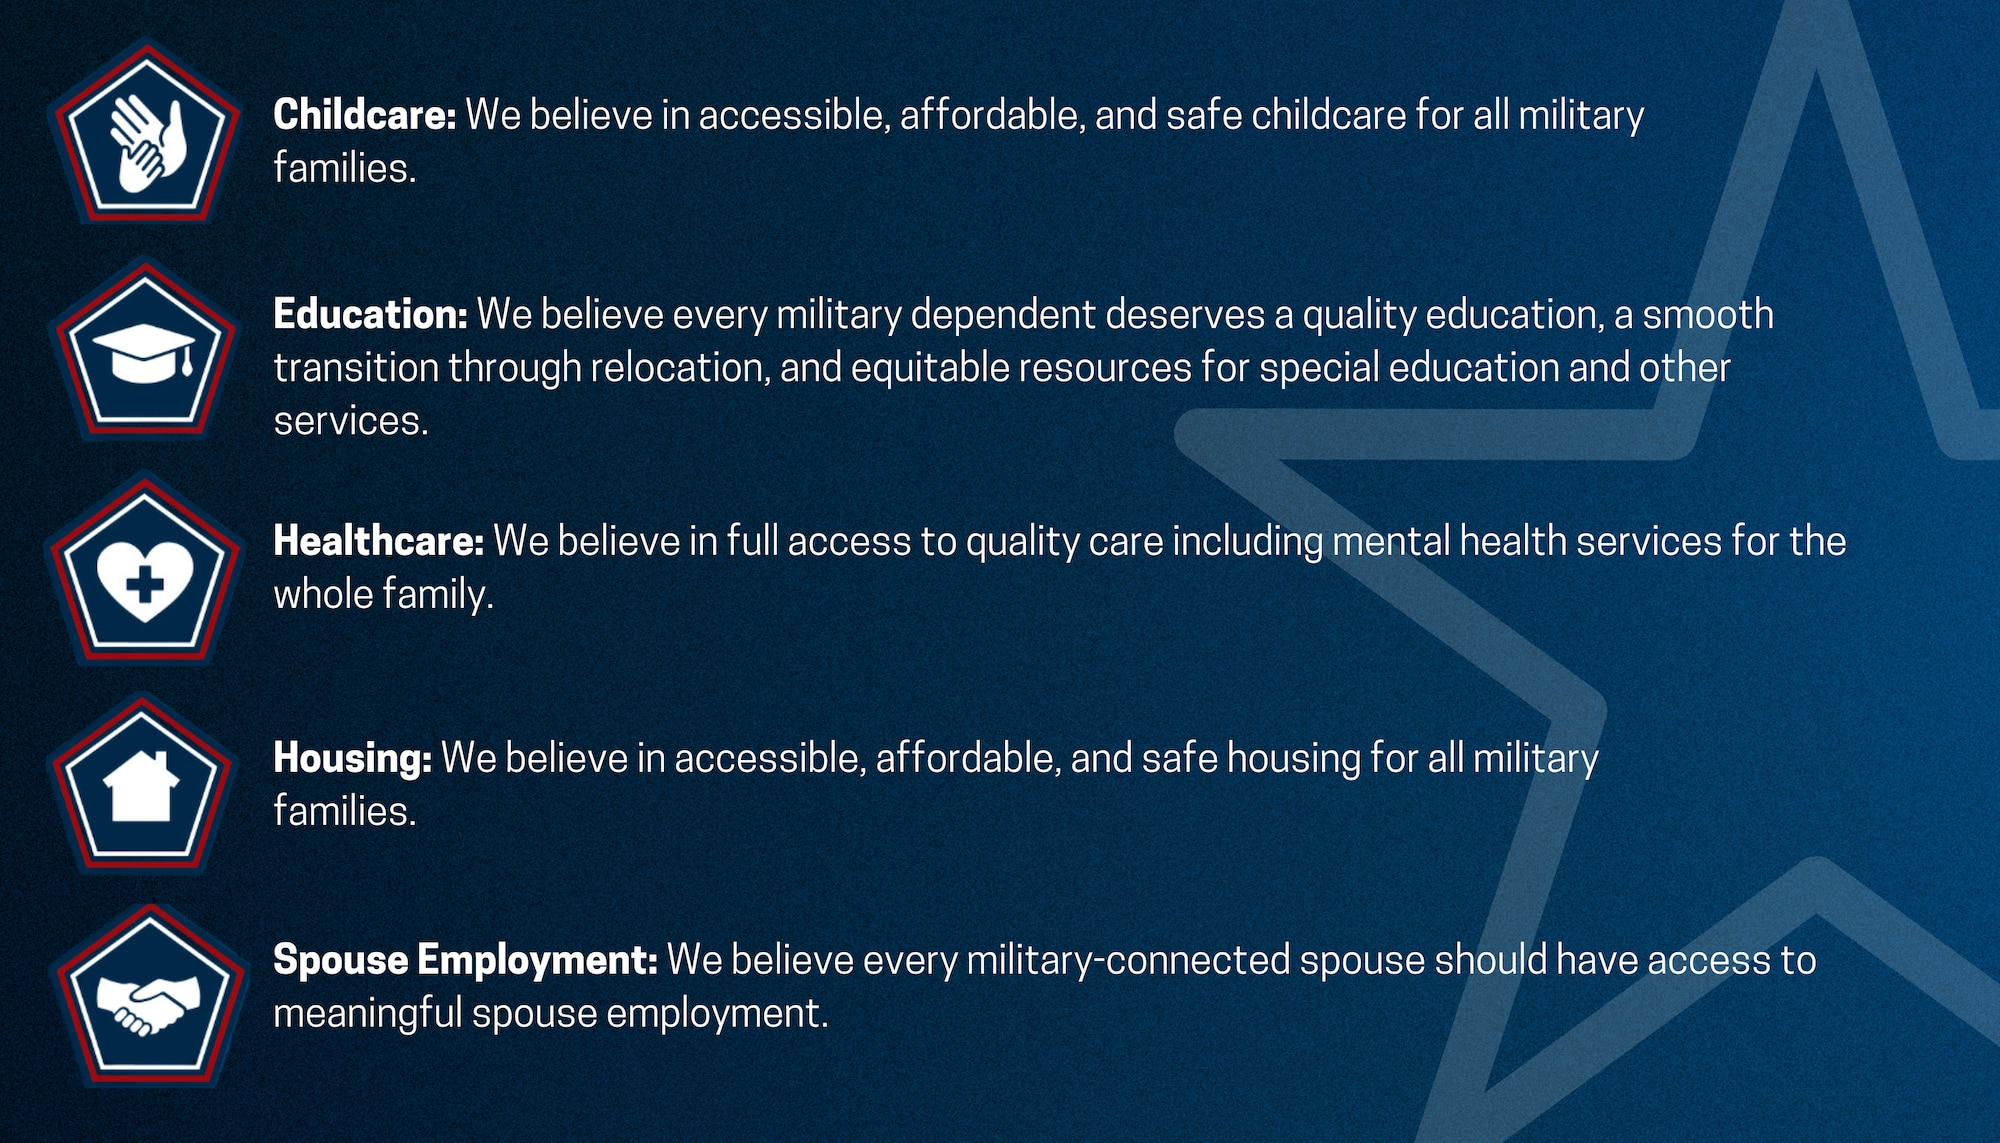 A list and description of the top five quality-of-life issues - childcare, education, healthcare, housing, and spouse employment – faced by military families.